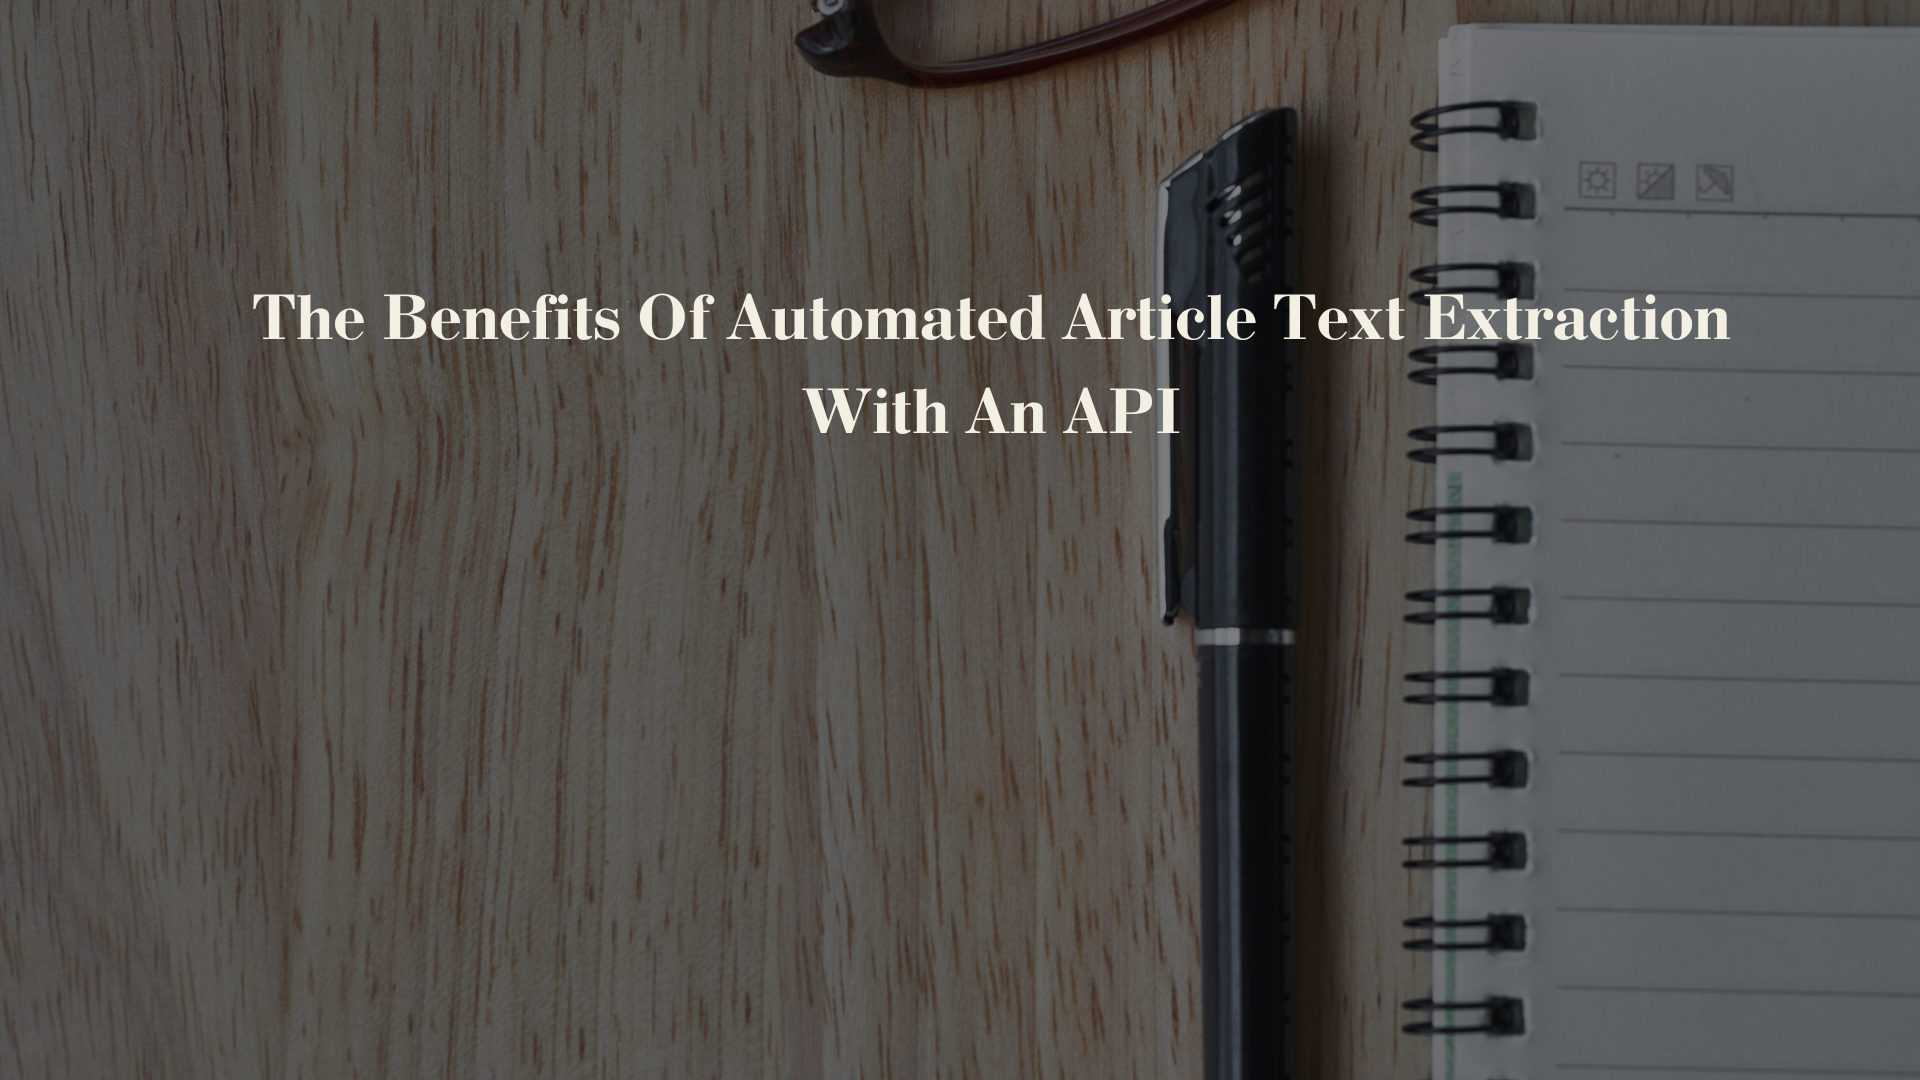 The Benefits Of Automated Article Text Extraction With An API